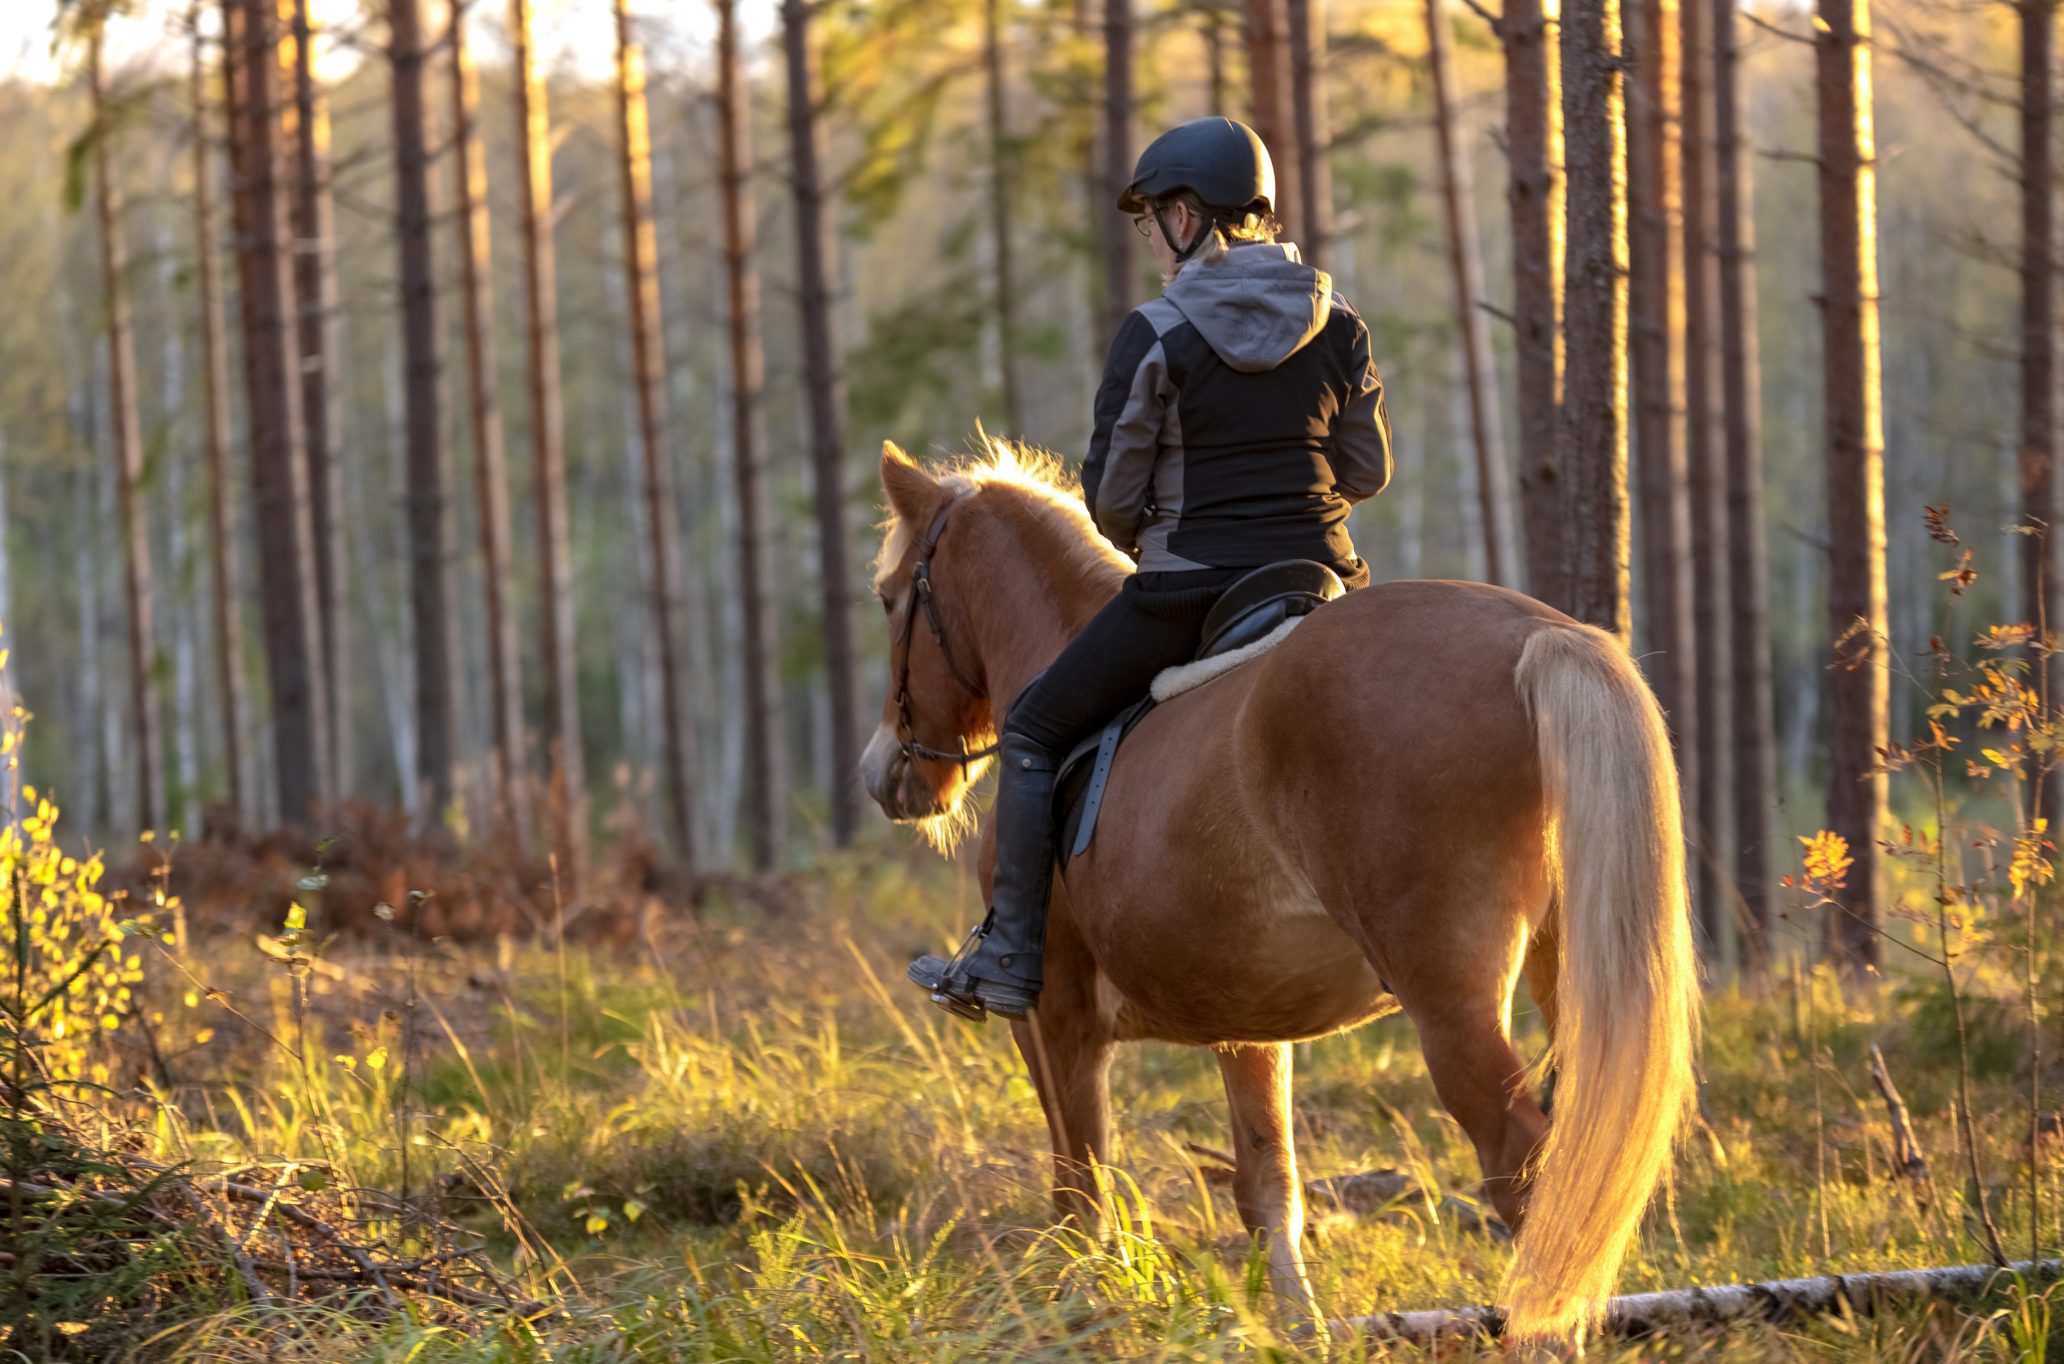 Woman horseback riding in forest